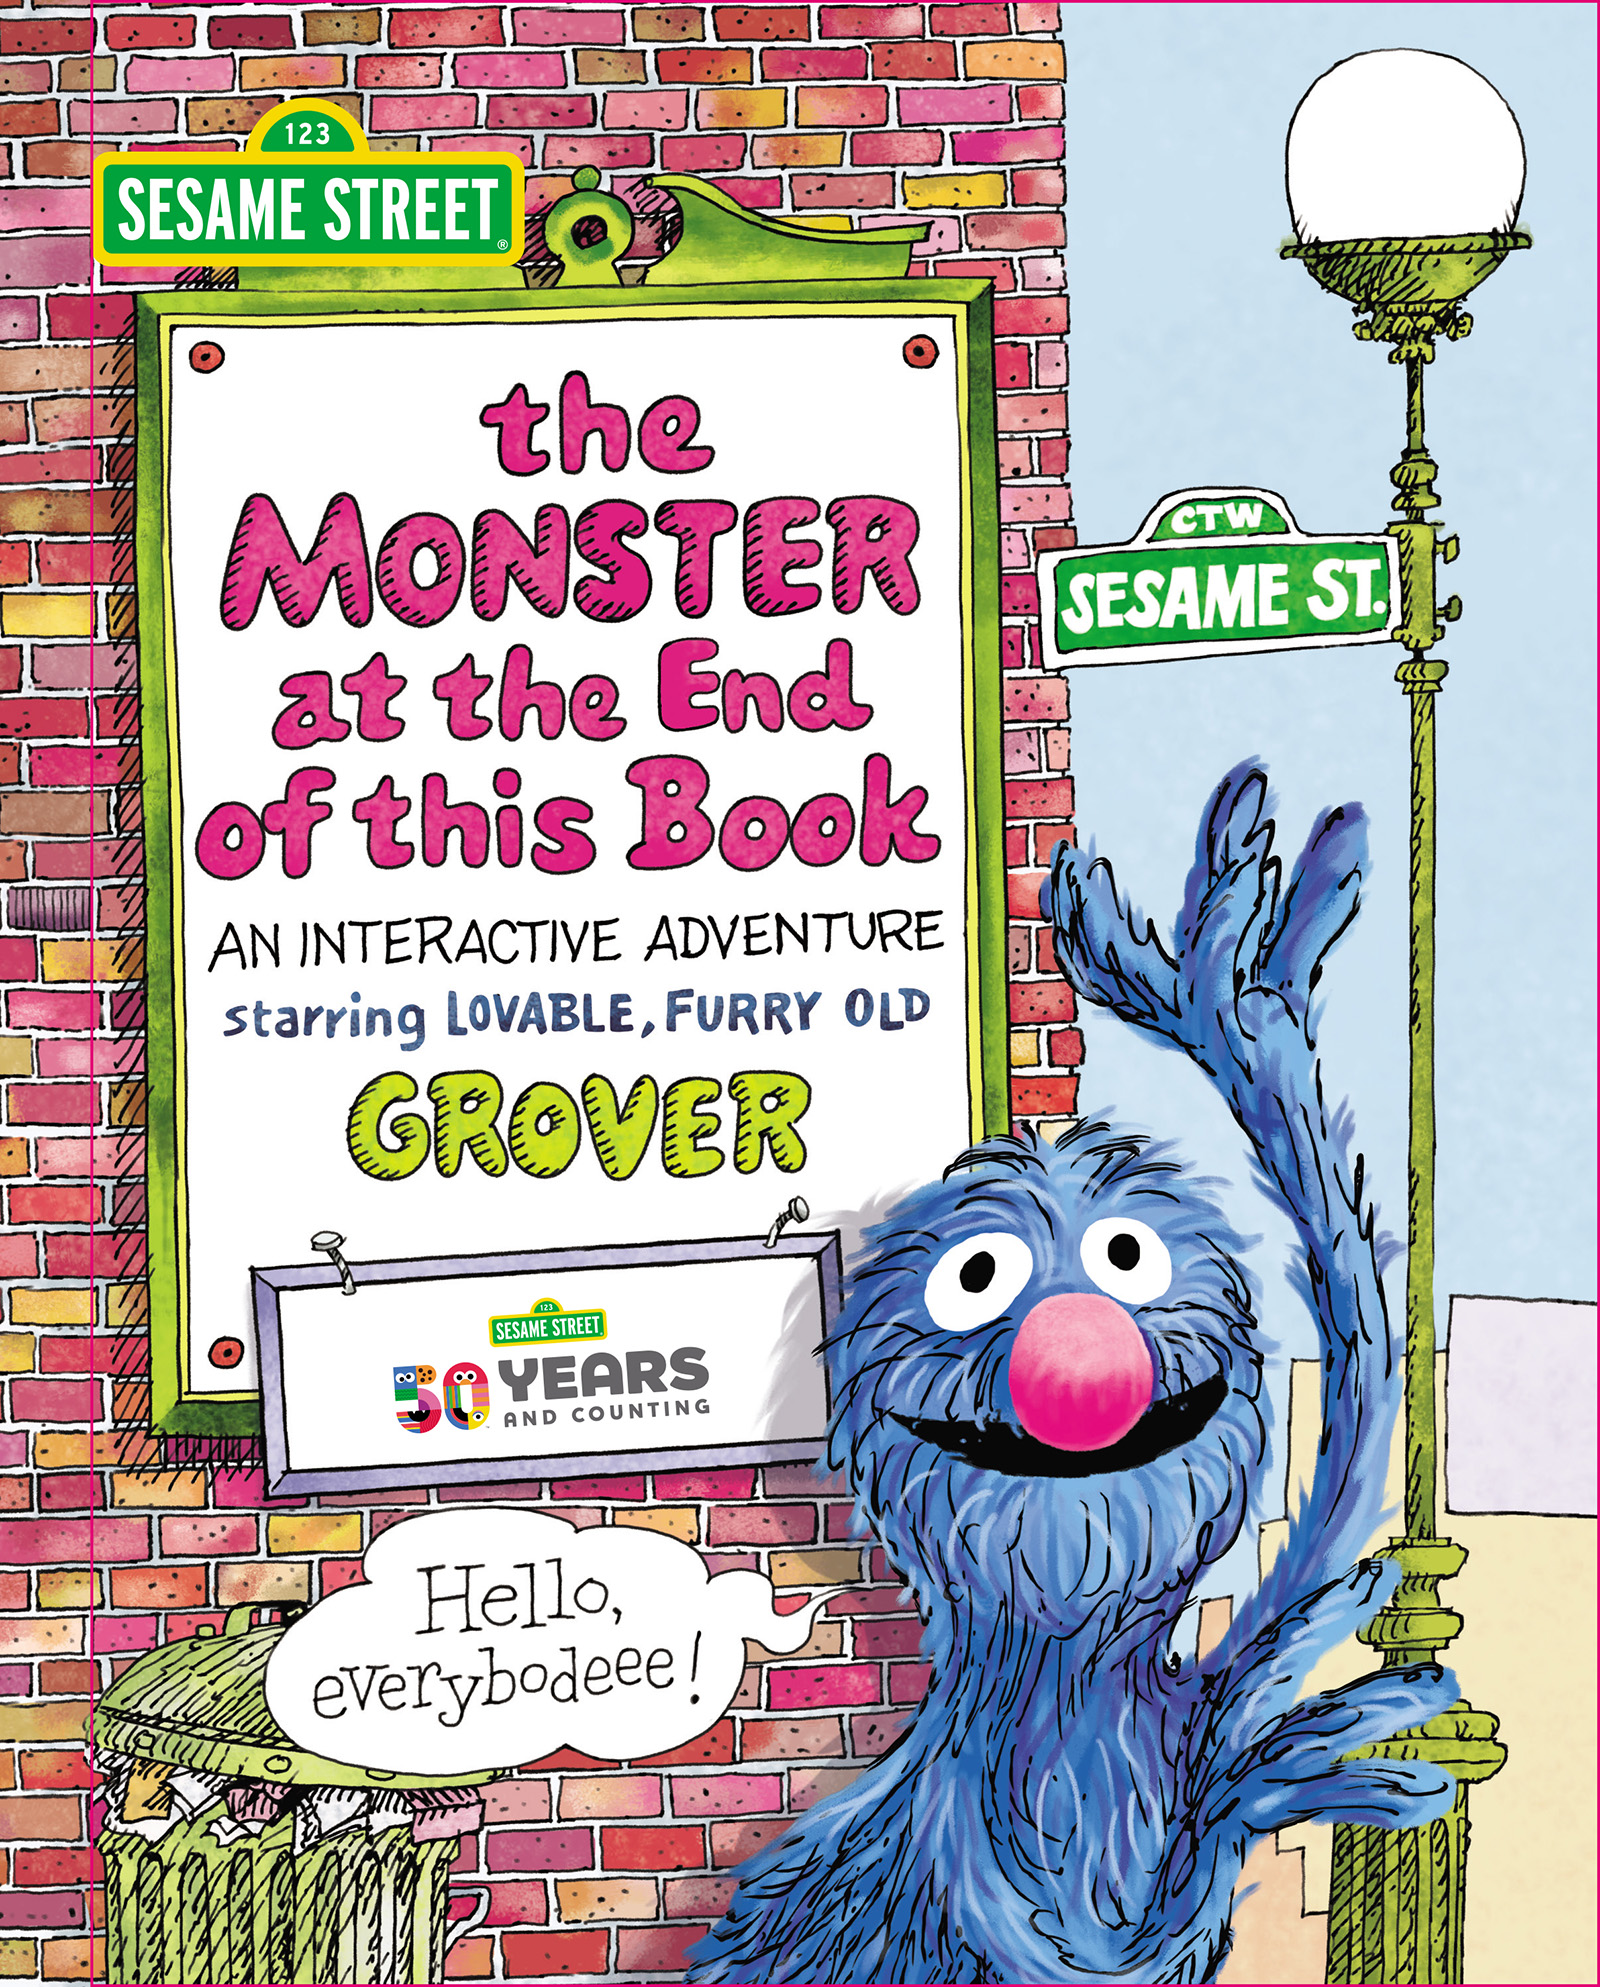 Sesame Street: The Monster at the End of This Book